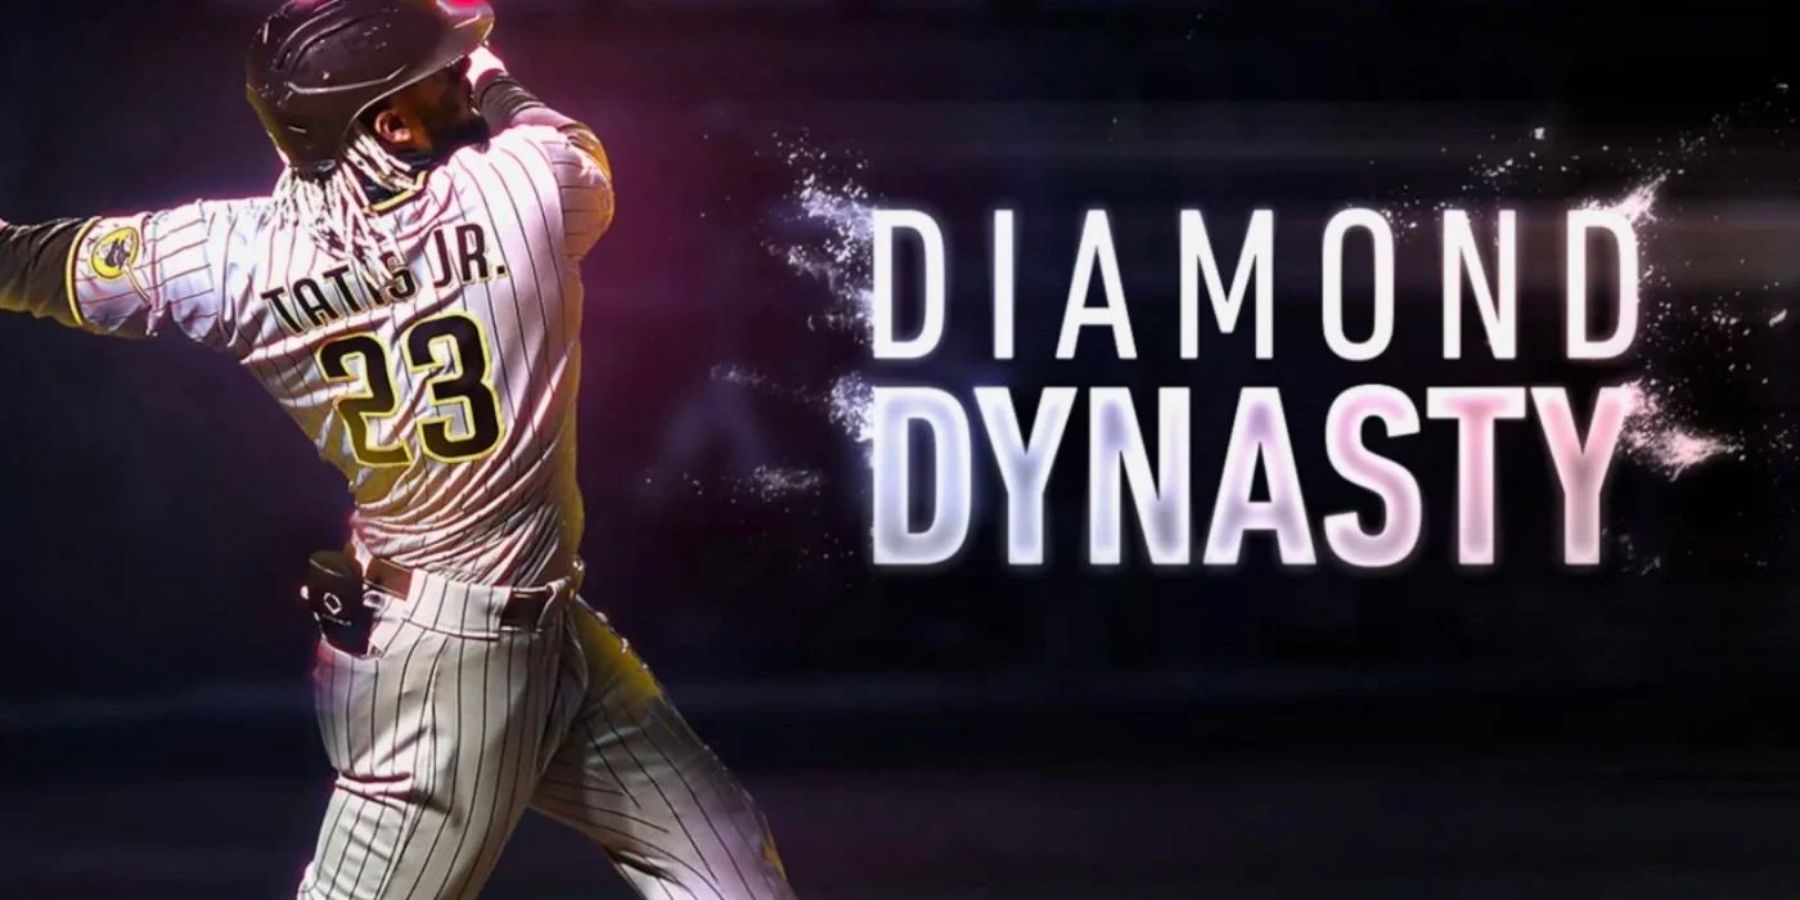 The Best Endgame Diamond Dynasty Cards to Have in MLB The Show 21